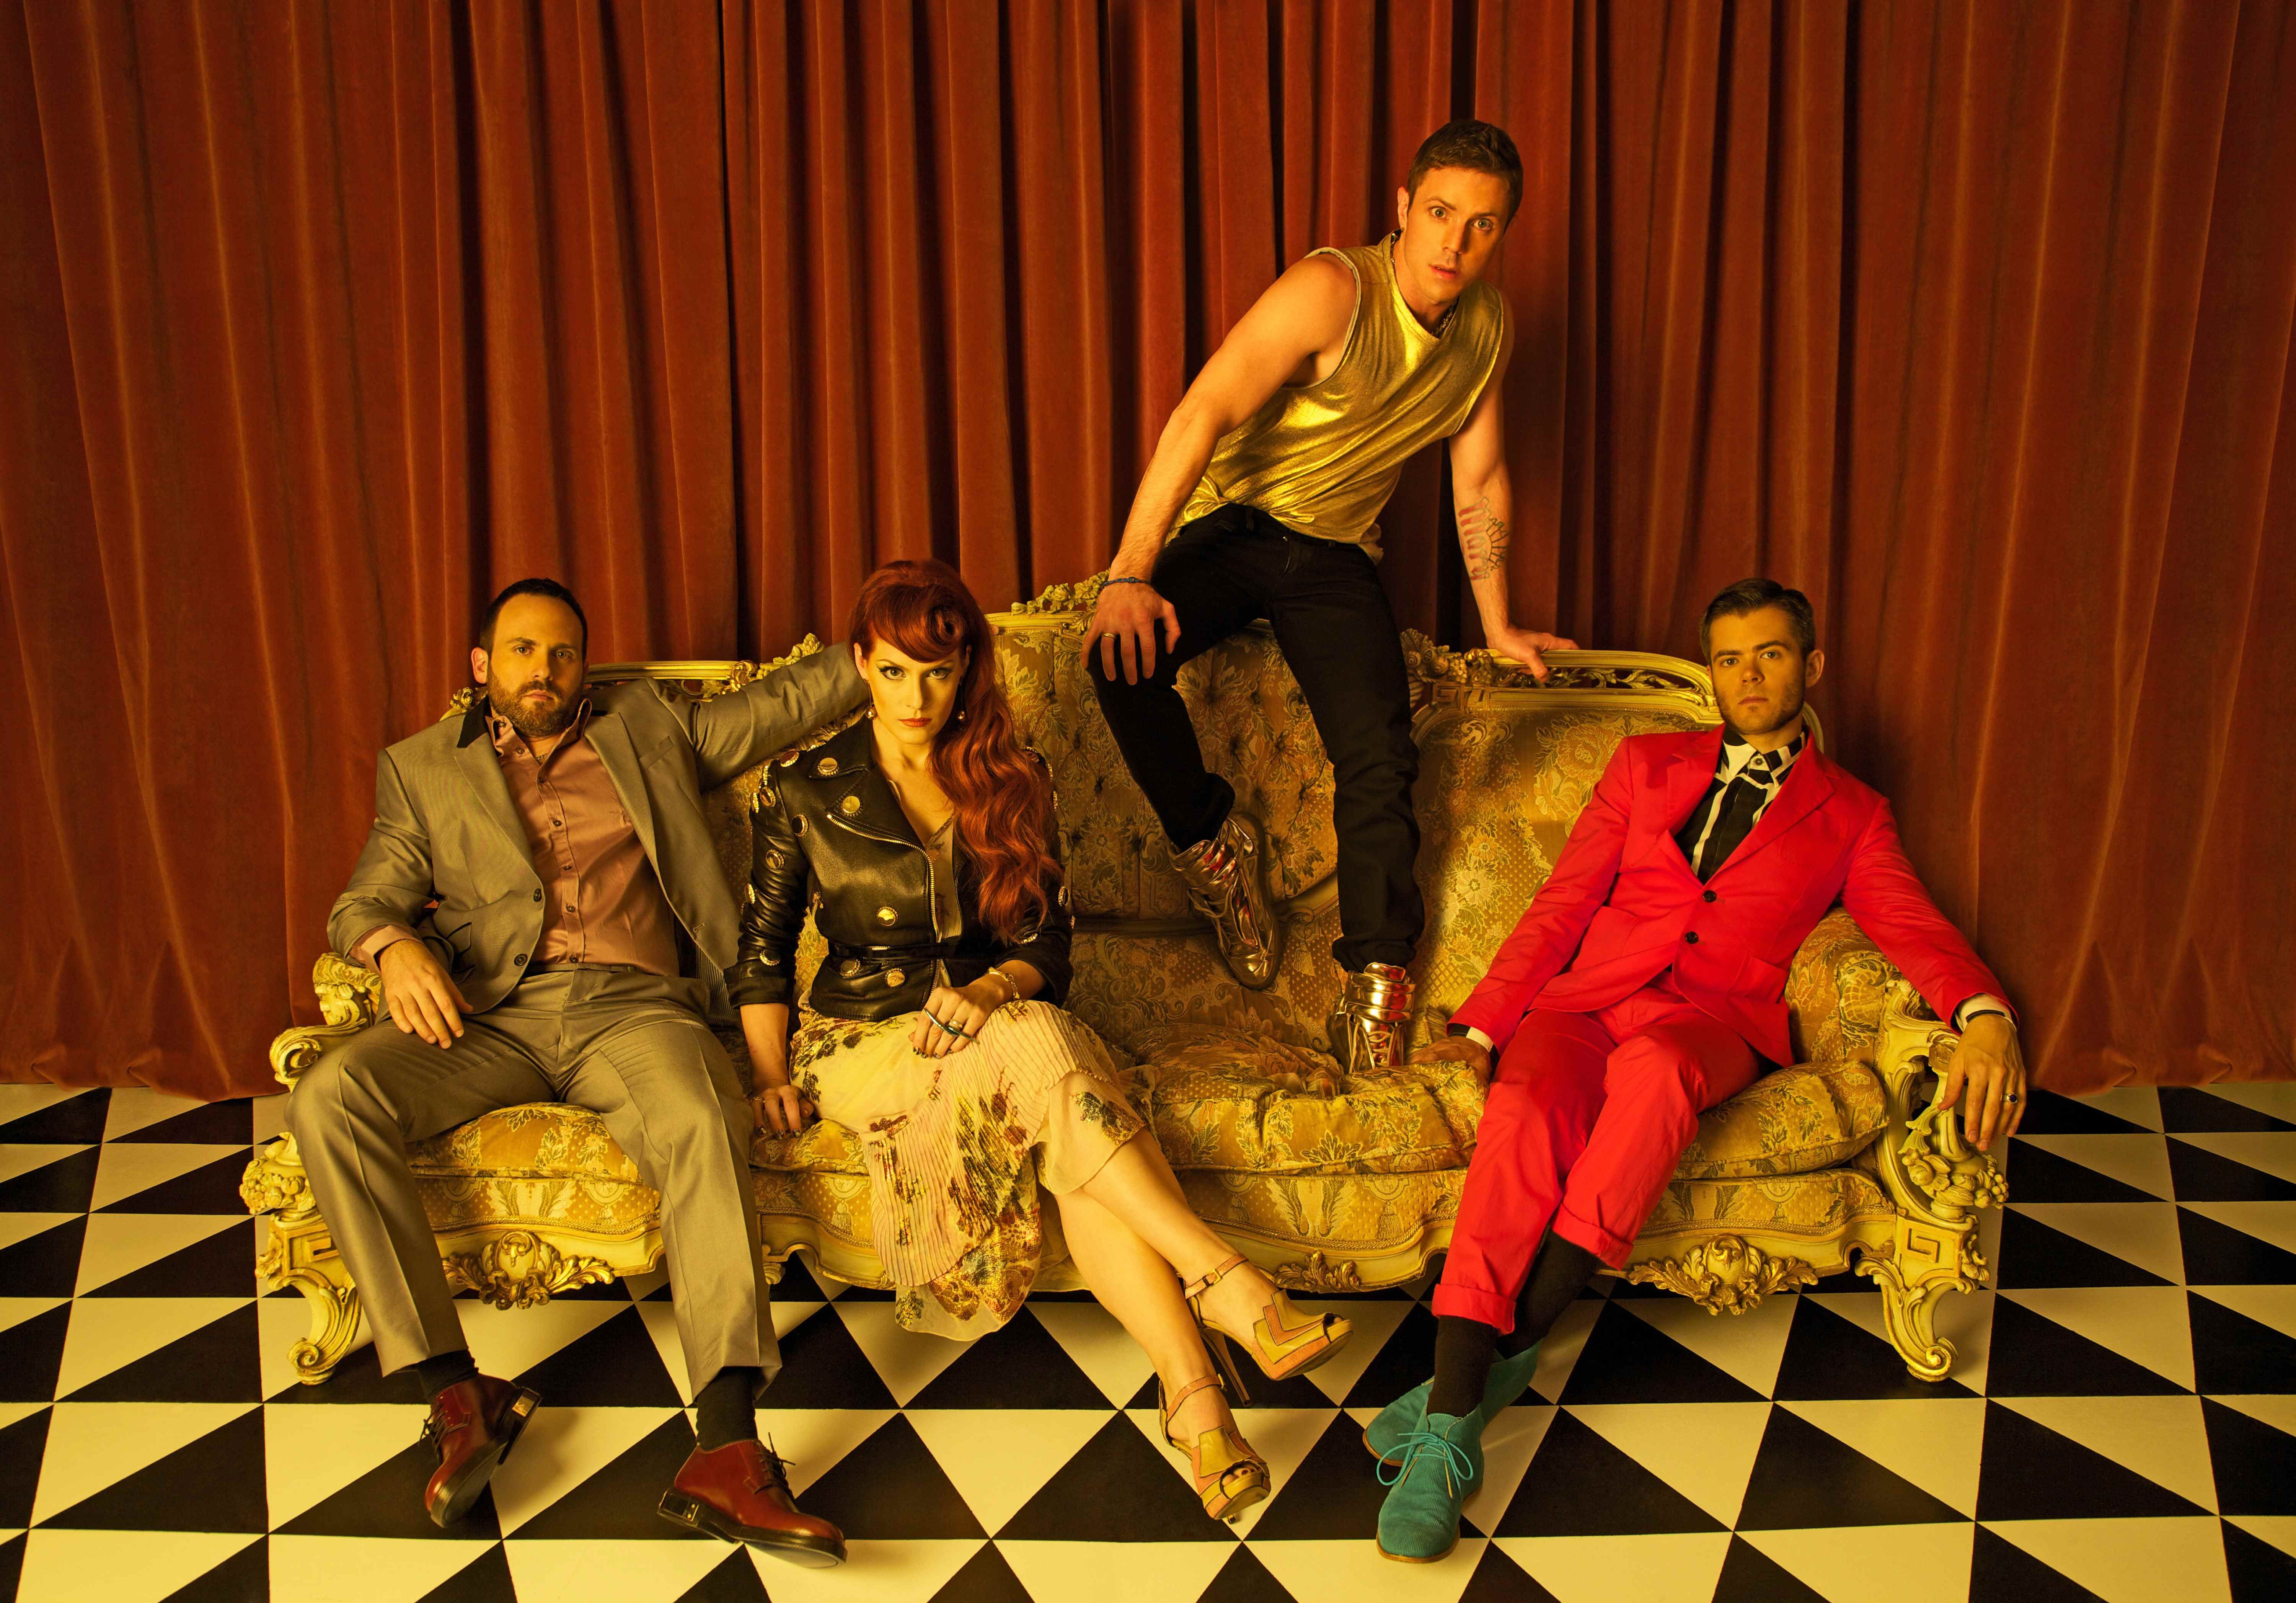 Scissor Sisters – “We usually surprise ourselves” Main Image